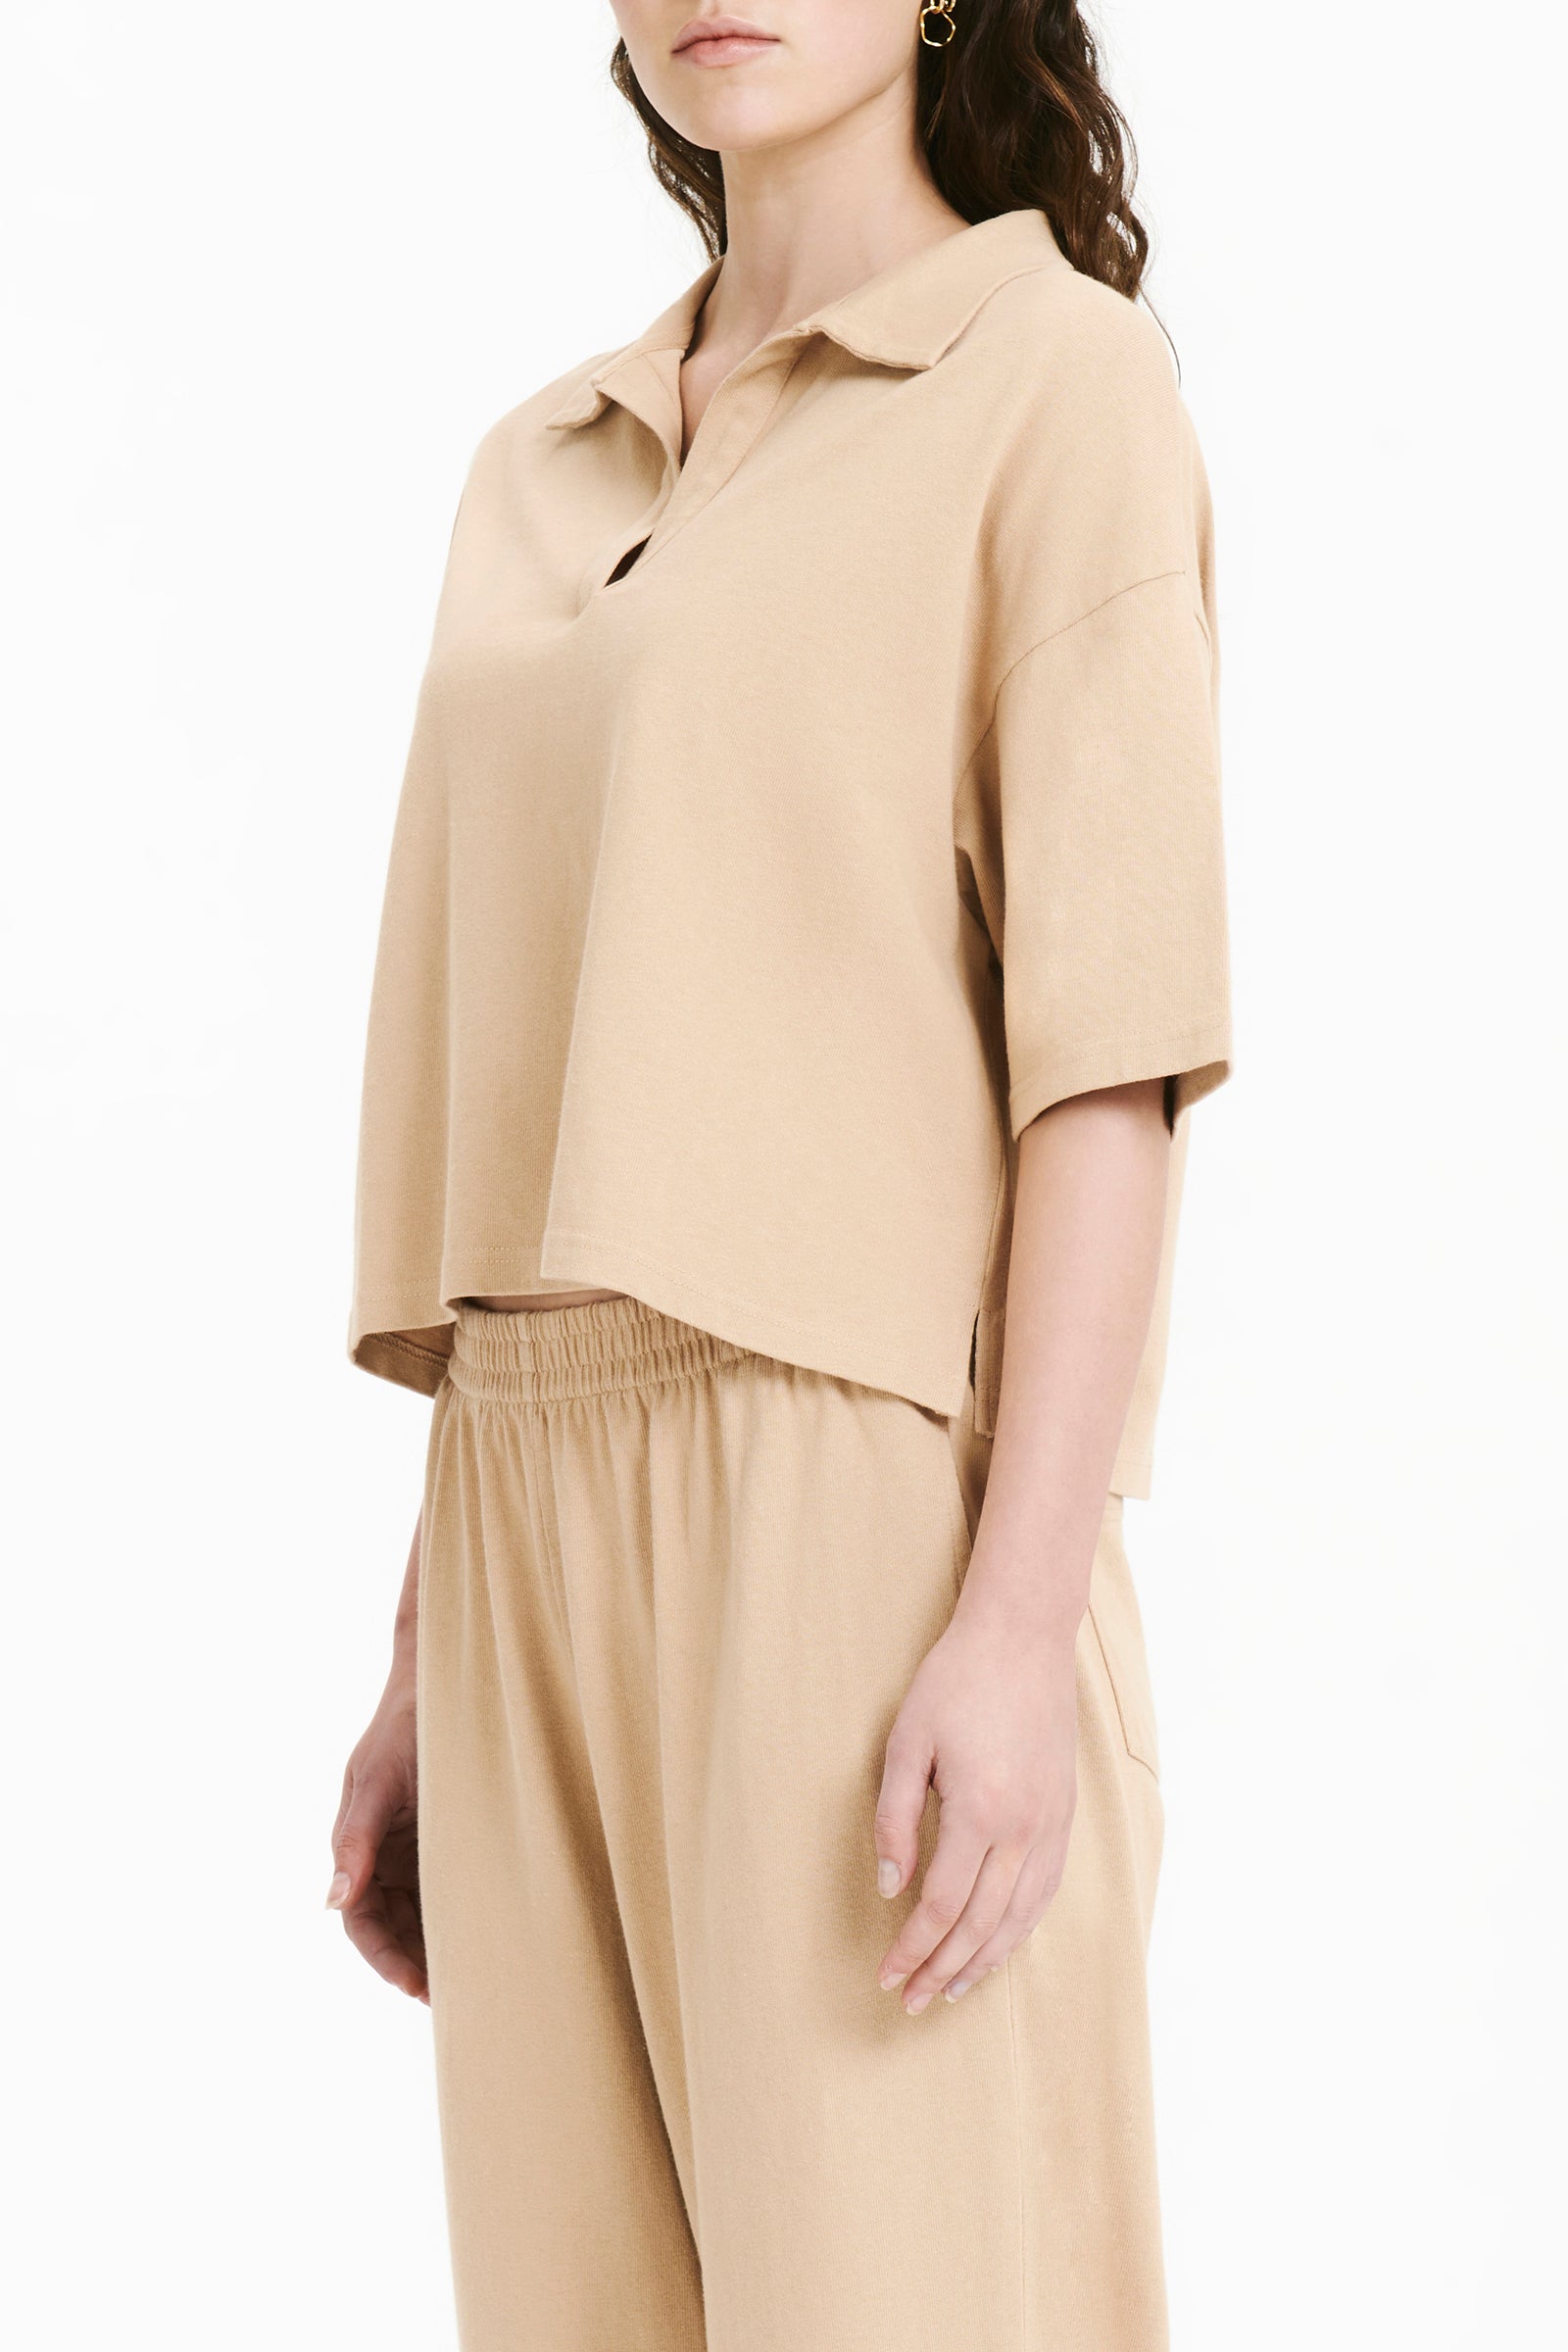 Nude Lucy Fresno Rugby Top In A Light Yellow Toned Dune Colour